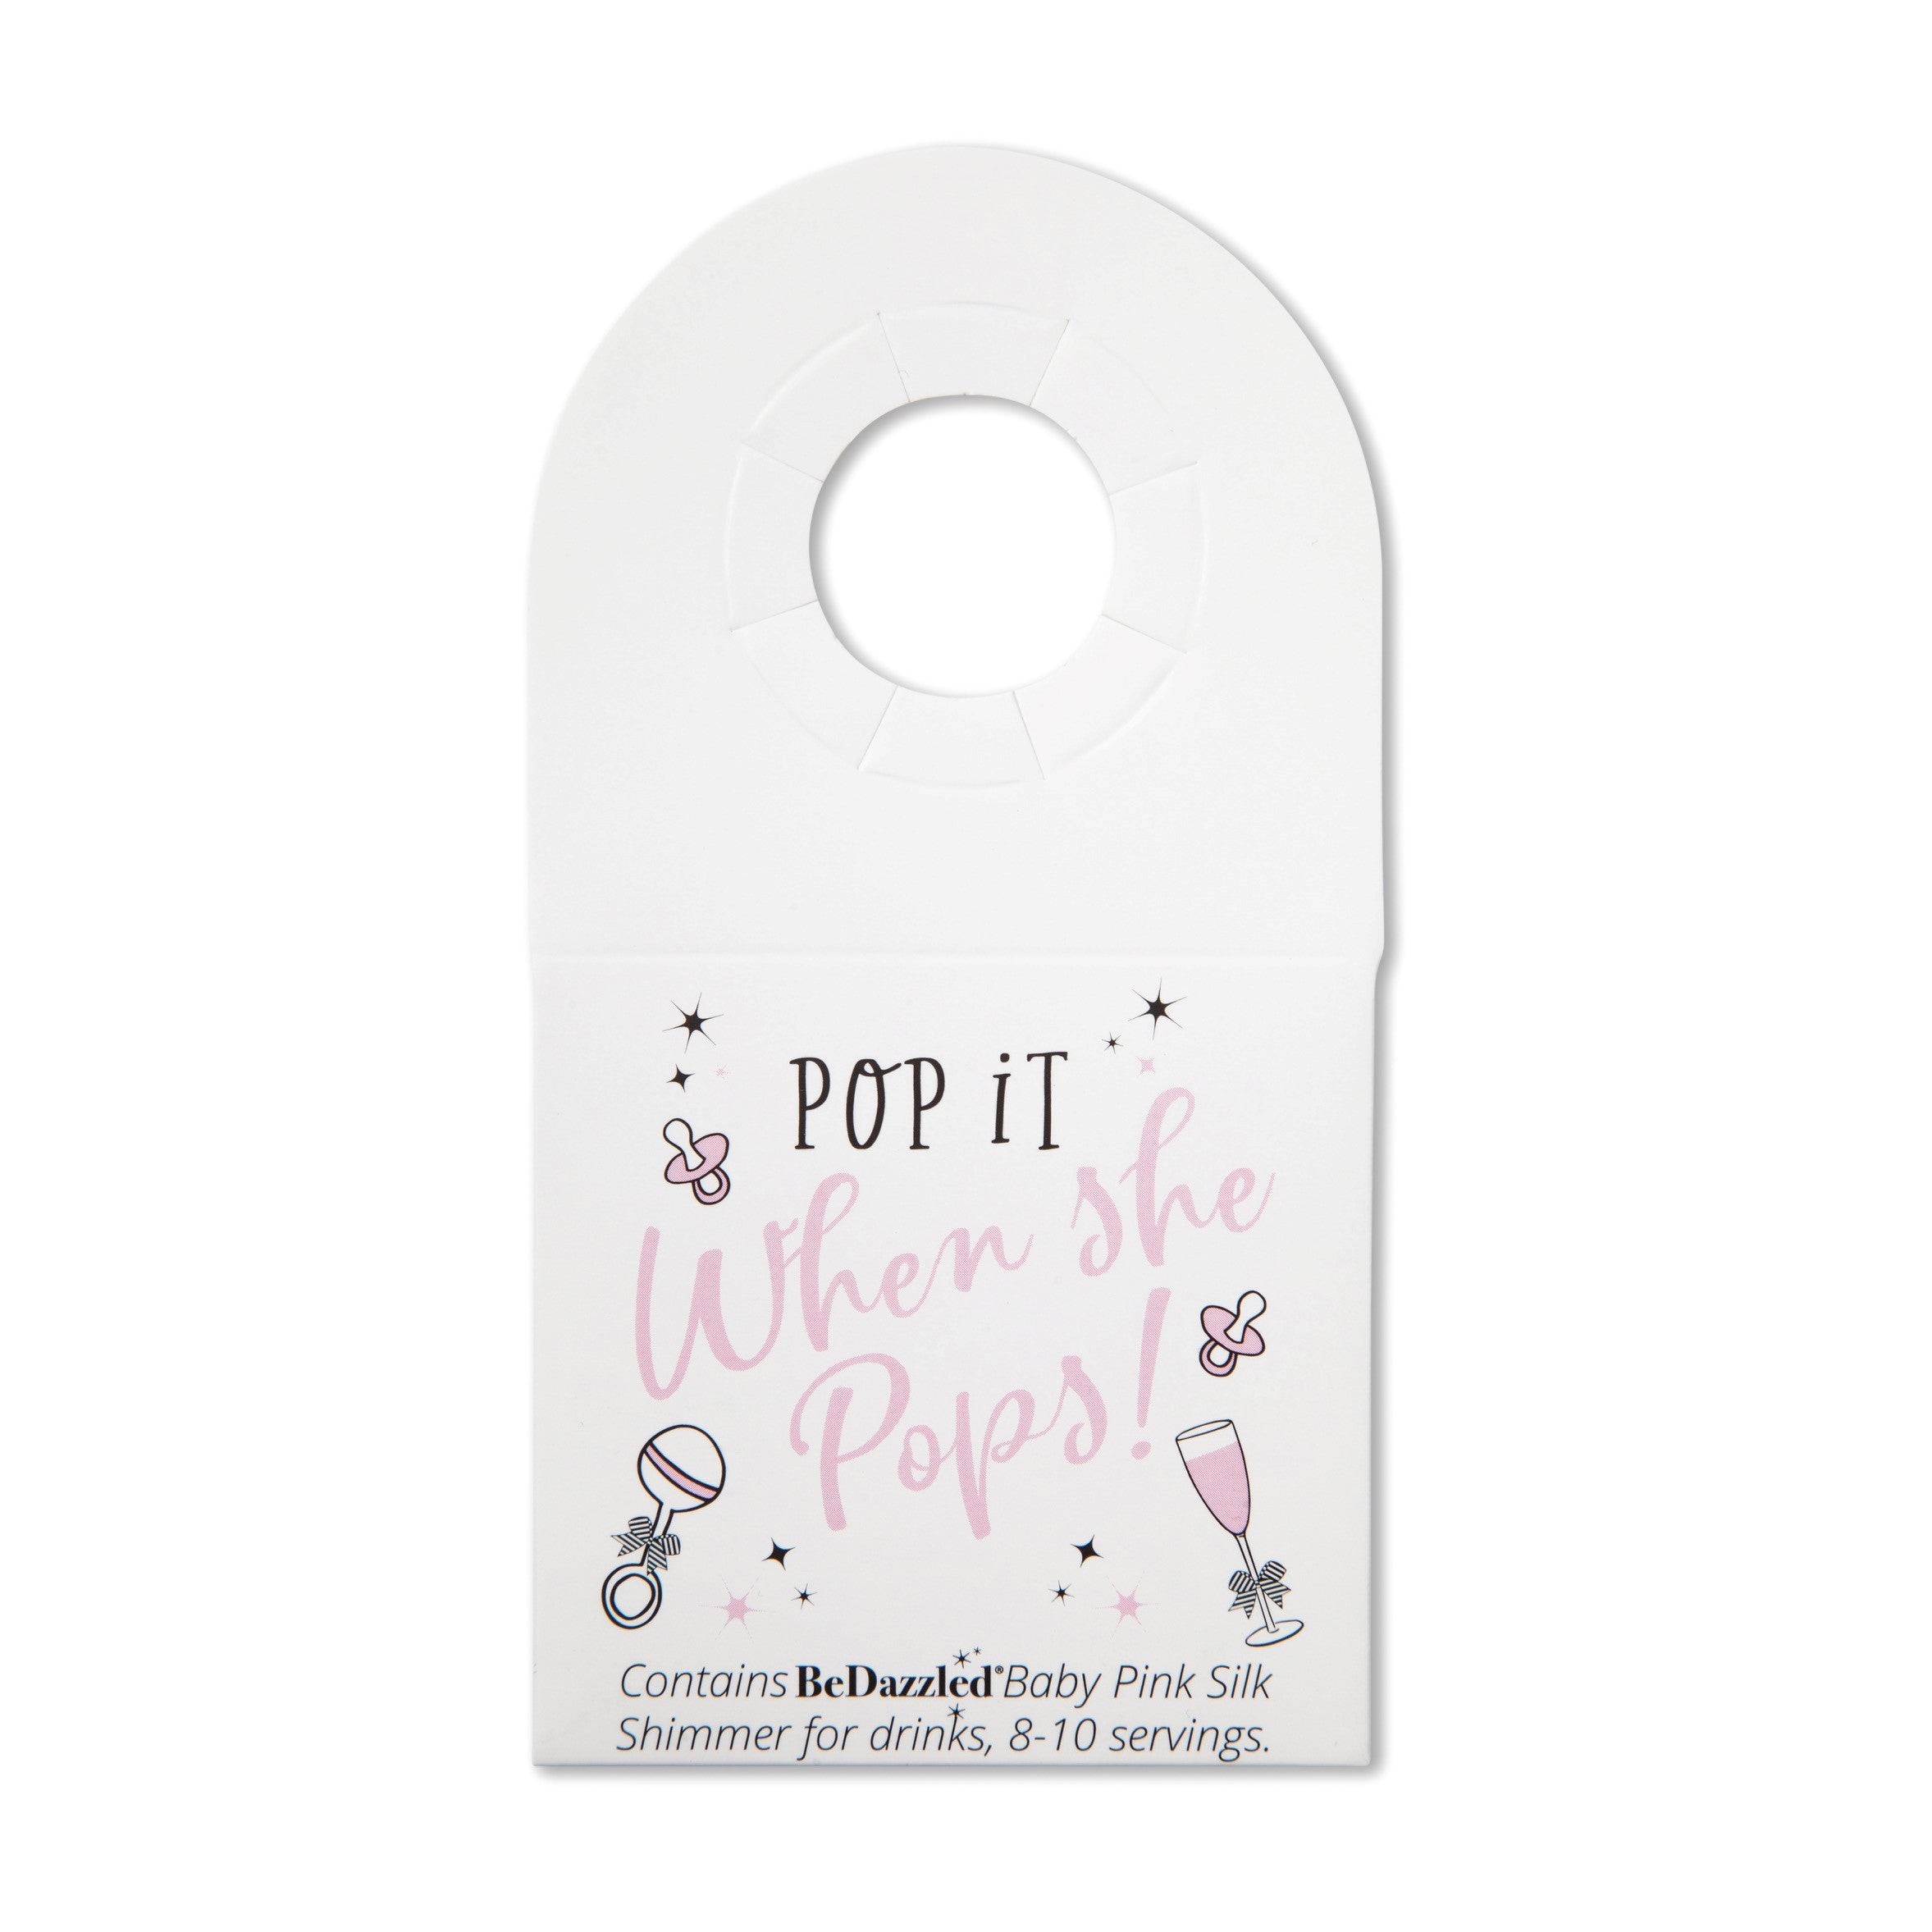 Pop it when she Pops! - bottle neck gift tag containing BABY PINK shimmer